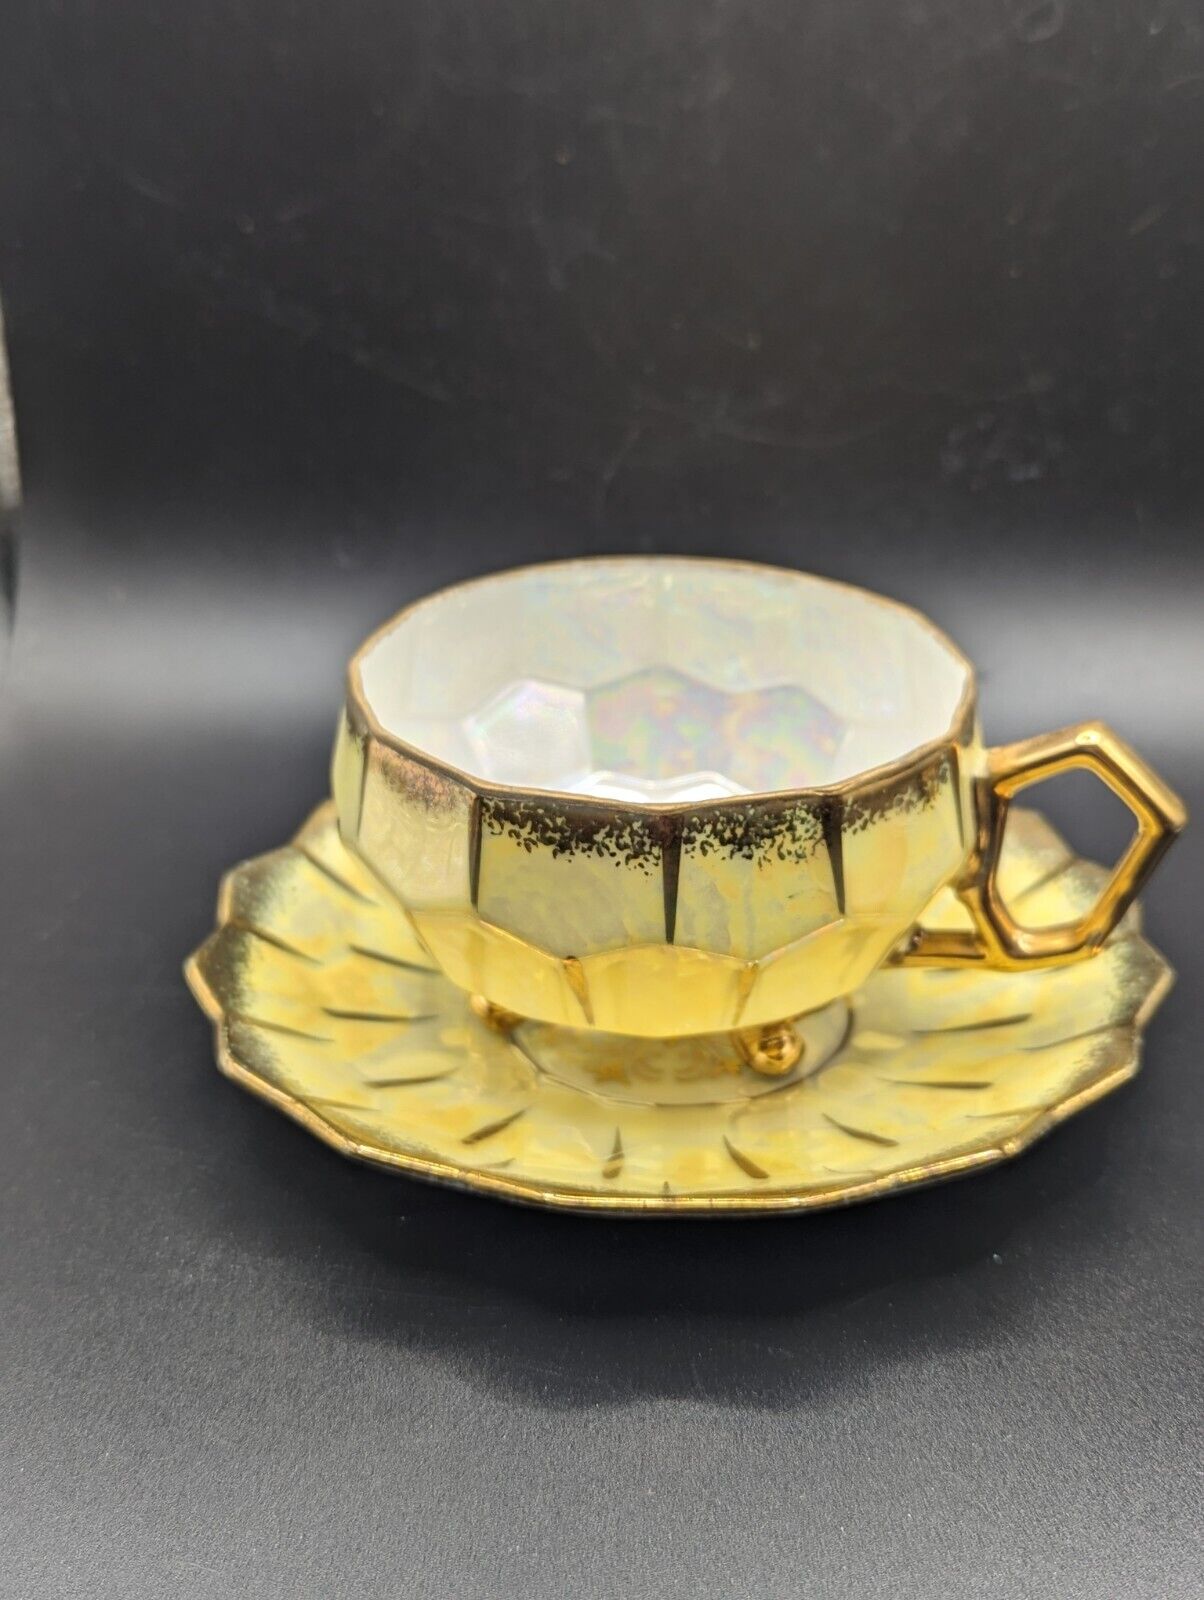 VTG Royal Sealy Japan Teacup & Saucer Yellow Iridescent Gold Trim 3-Footed